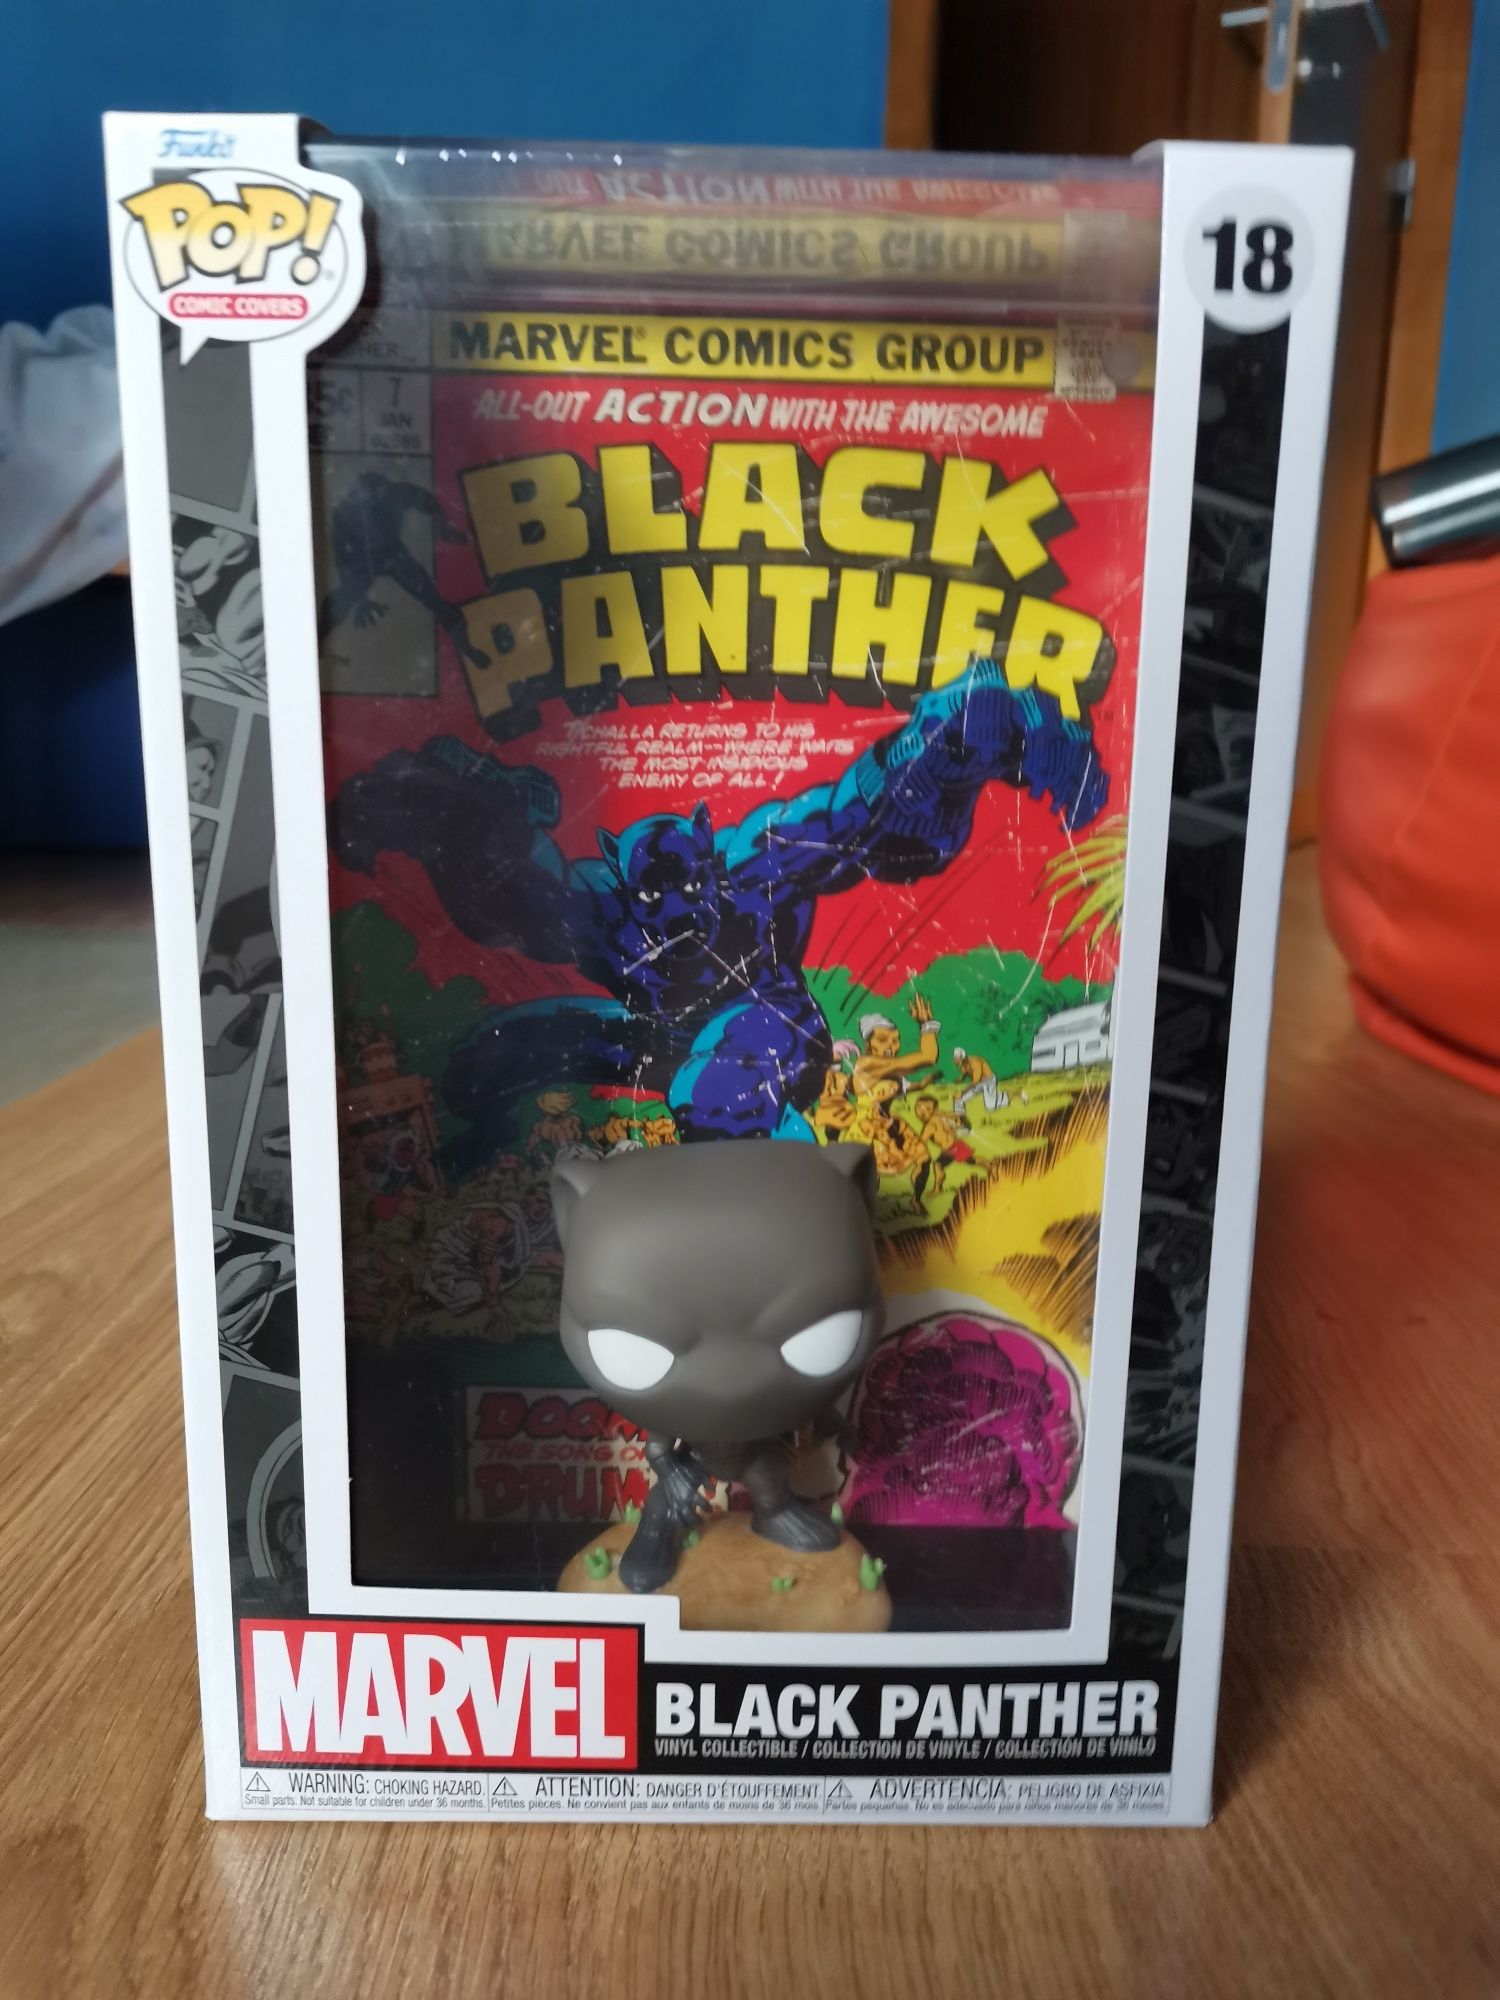 FUNKO Pop! Comic Cover - Marvel: Black Panther